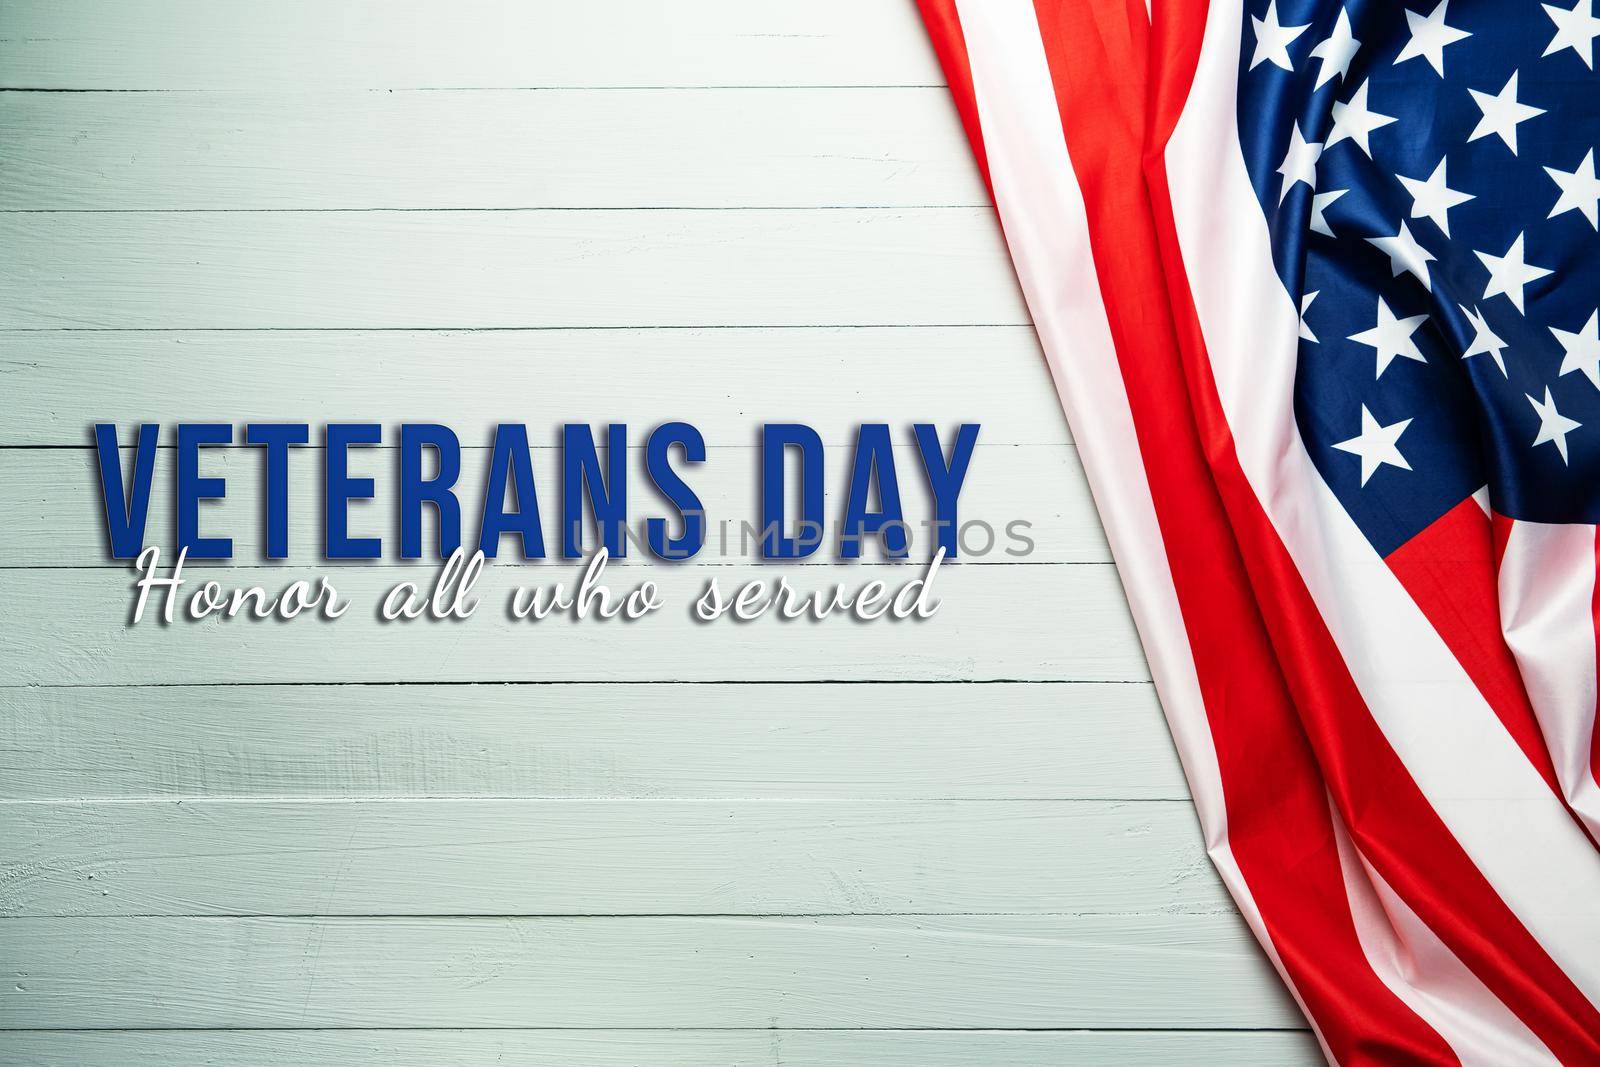 Veterans day. Honoring all who served. American flag on wooden background.